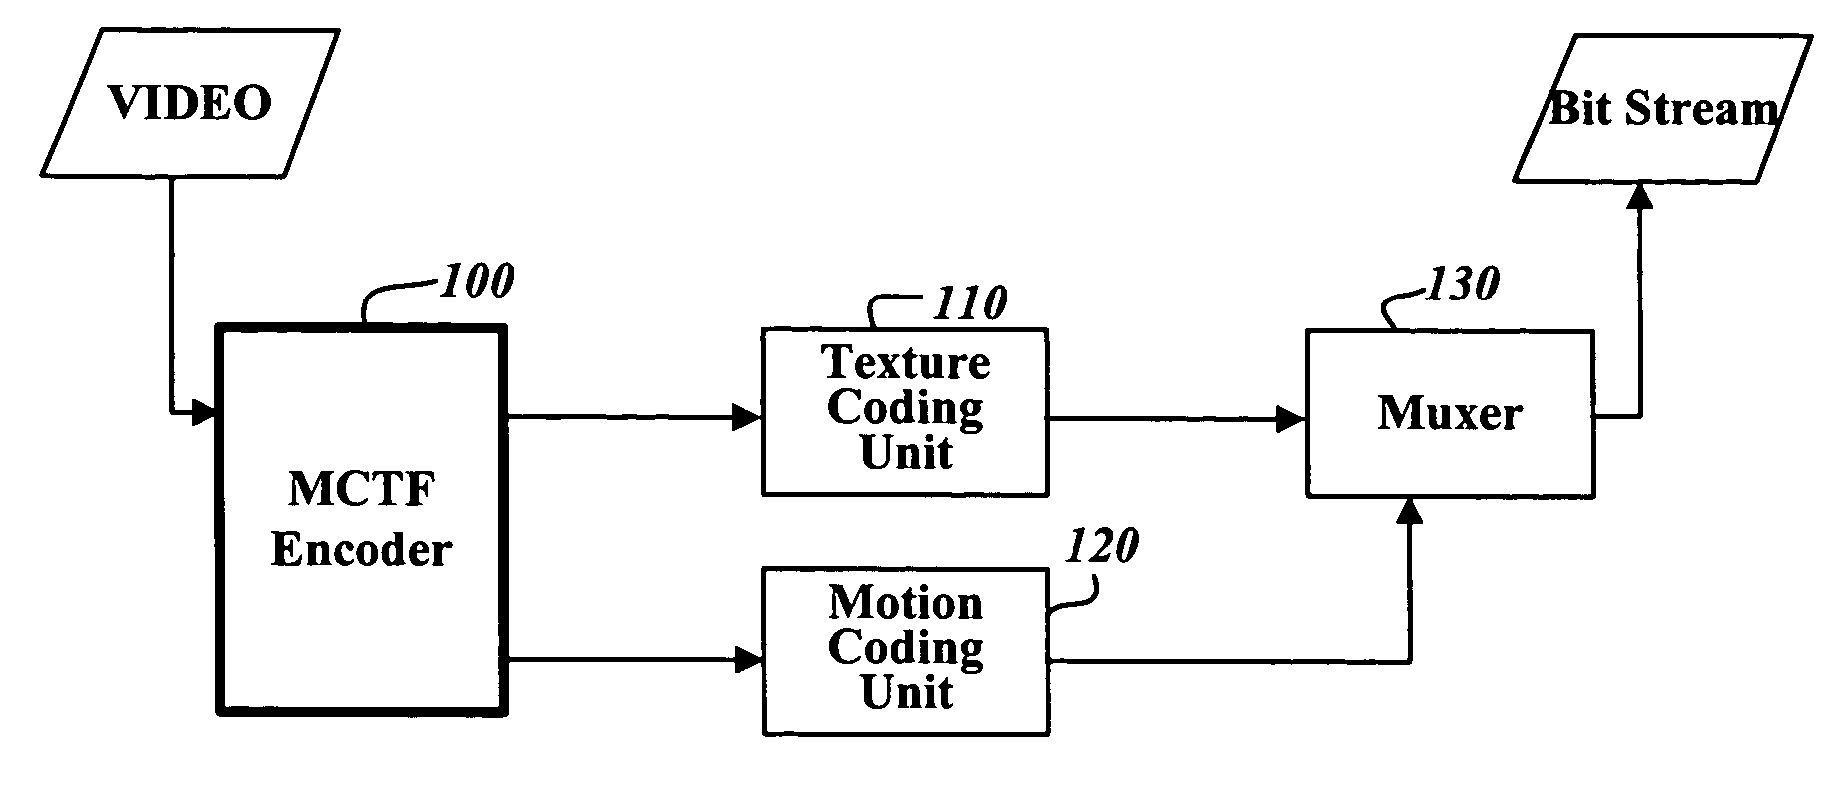 Method and device for encoding/decoding video signals using temporal and spatial correlations between macroblocks